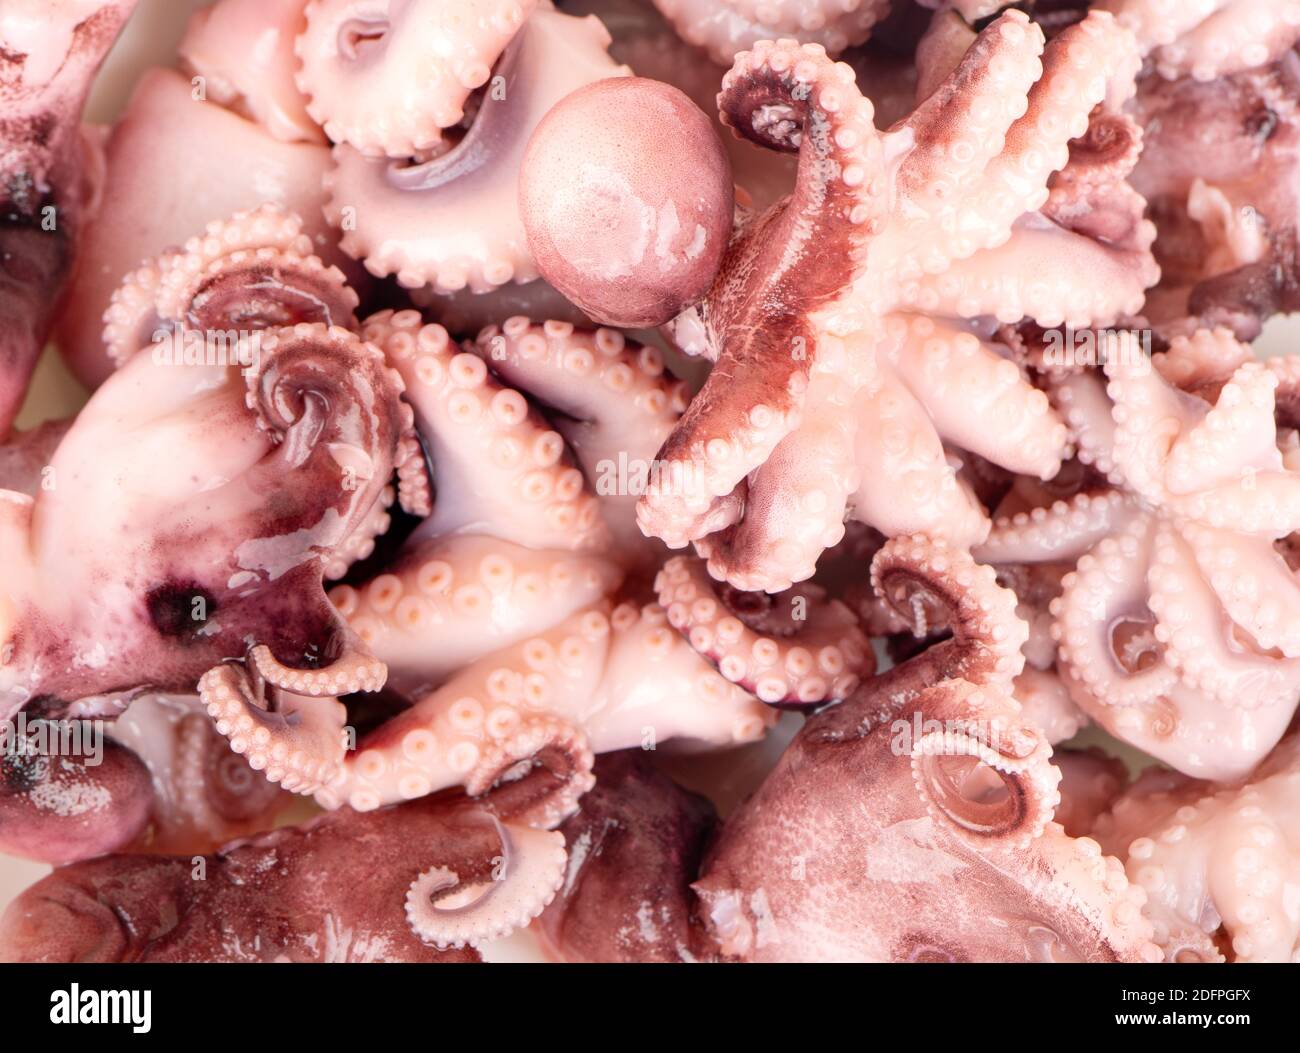 Background of scattered small pickled octopus close-up Stock Photo